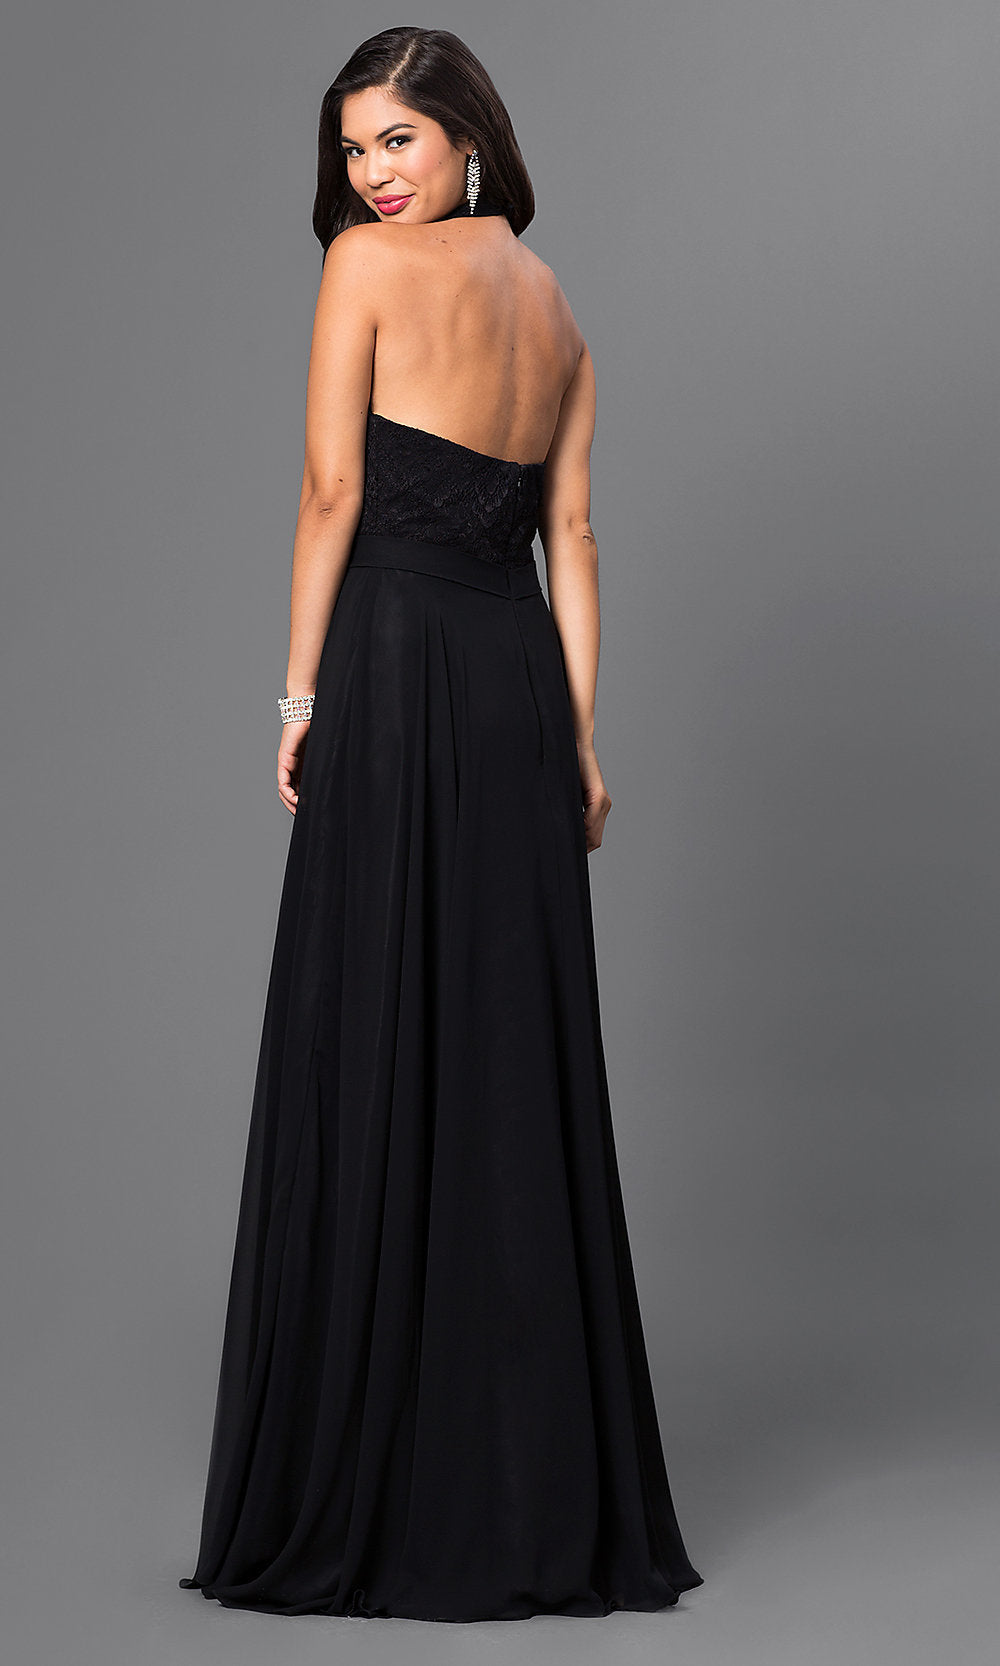 Long Chiffon Prom Dress with Lace Halter - PromGirl